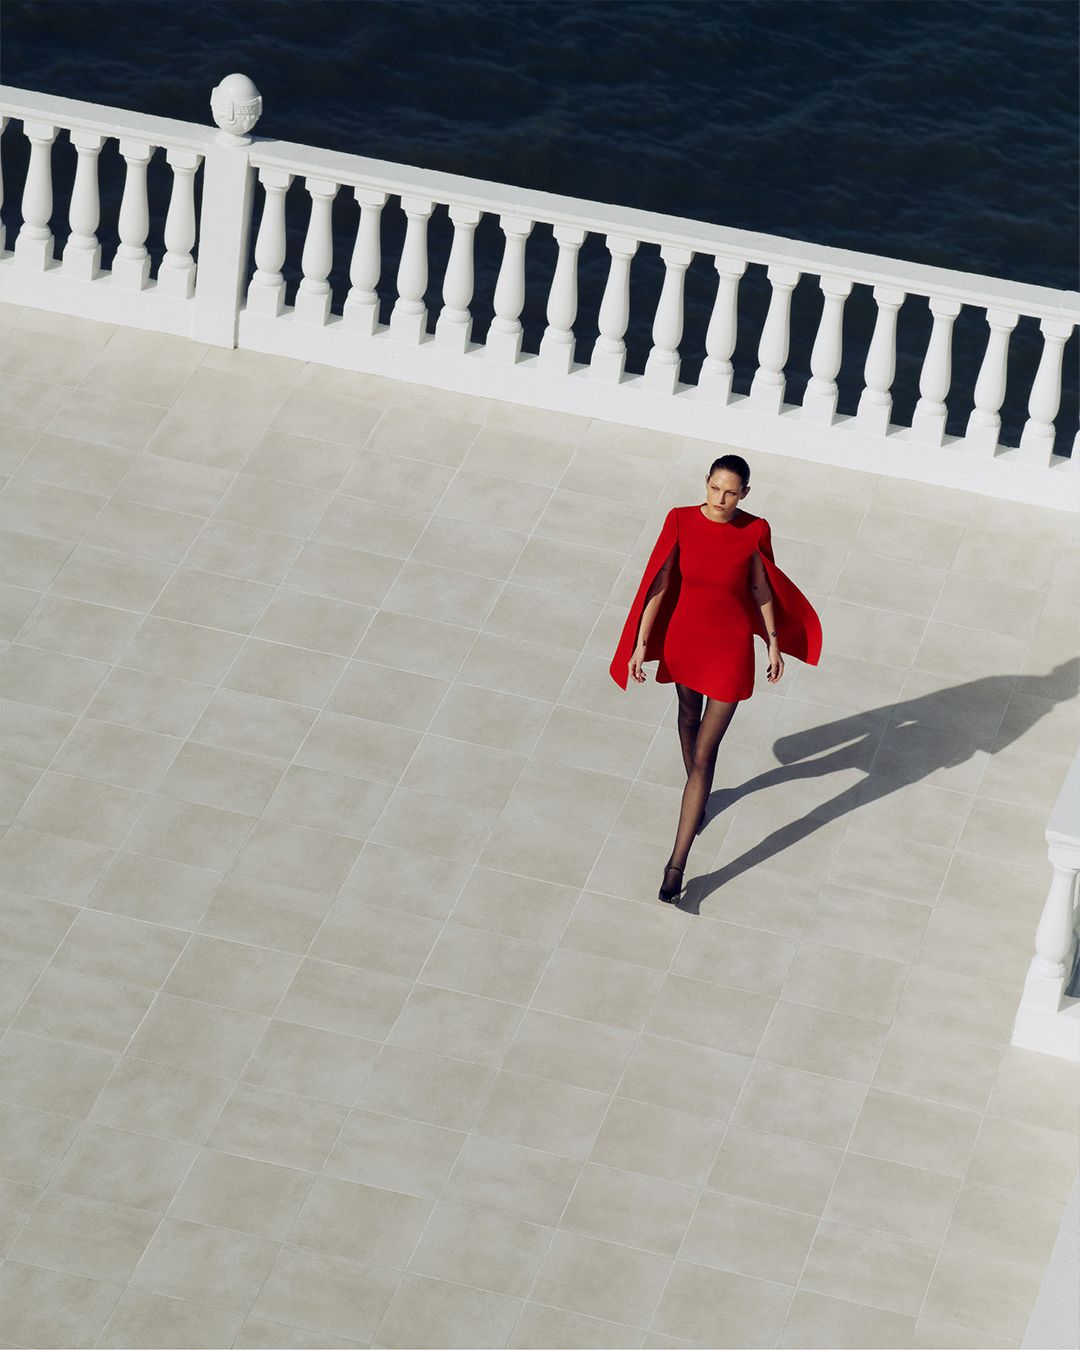 Crepe Knit Red Cape Dress walking on tiled balcony